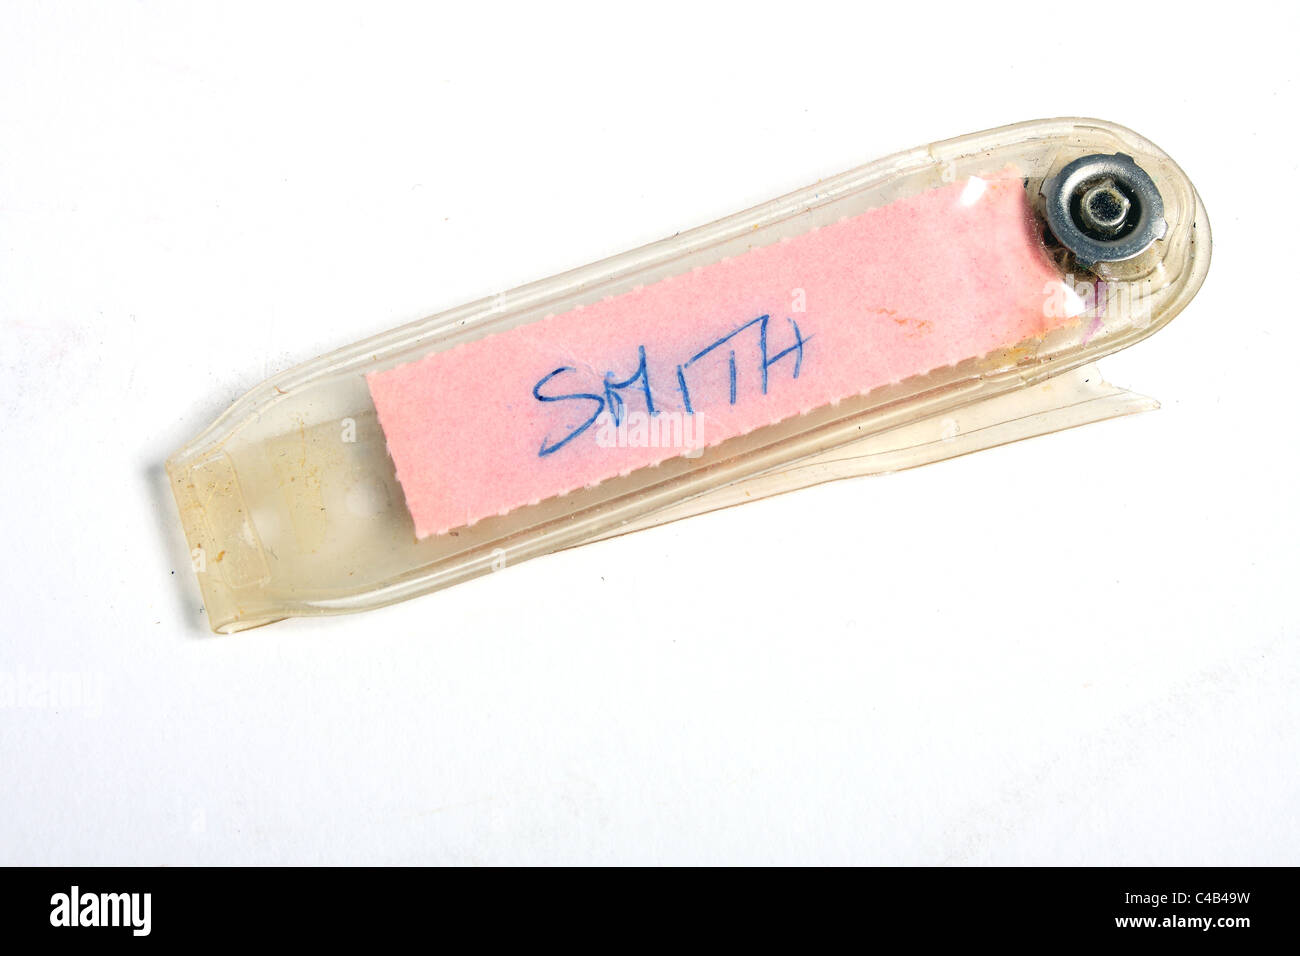 A wristband identifier name tag for a newborn baby with the name of Smith. This is an old fashioned name tag from 1981. Stock Photo